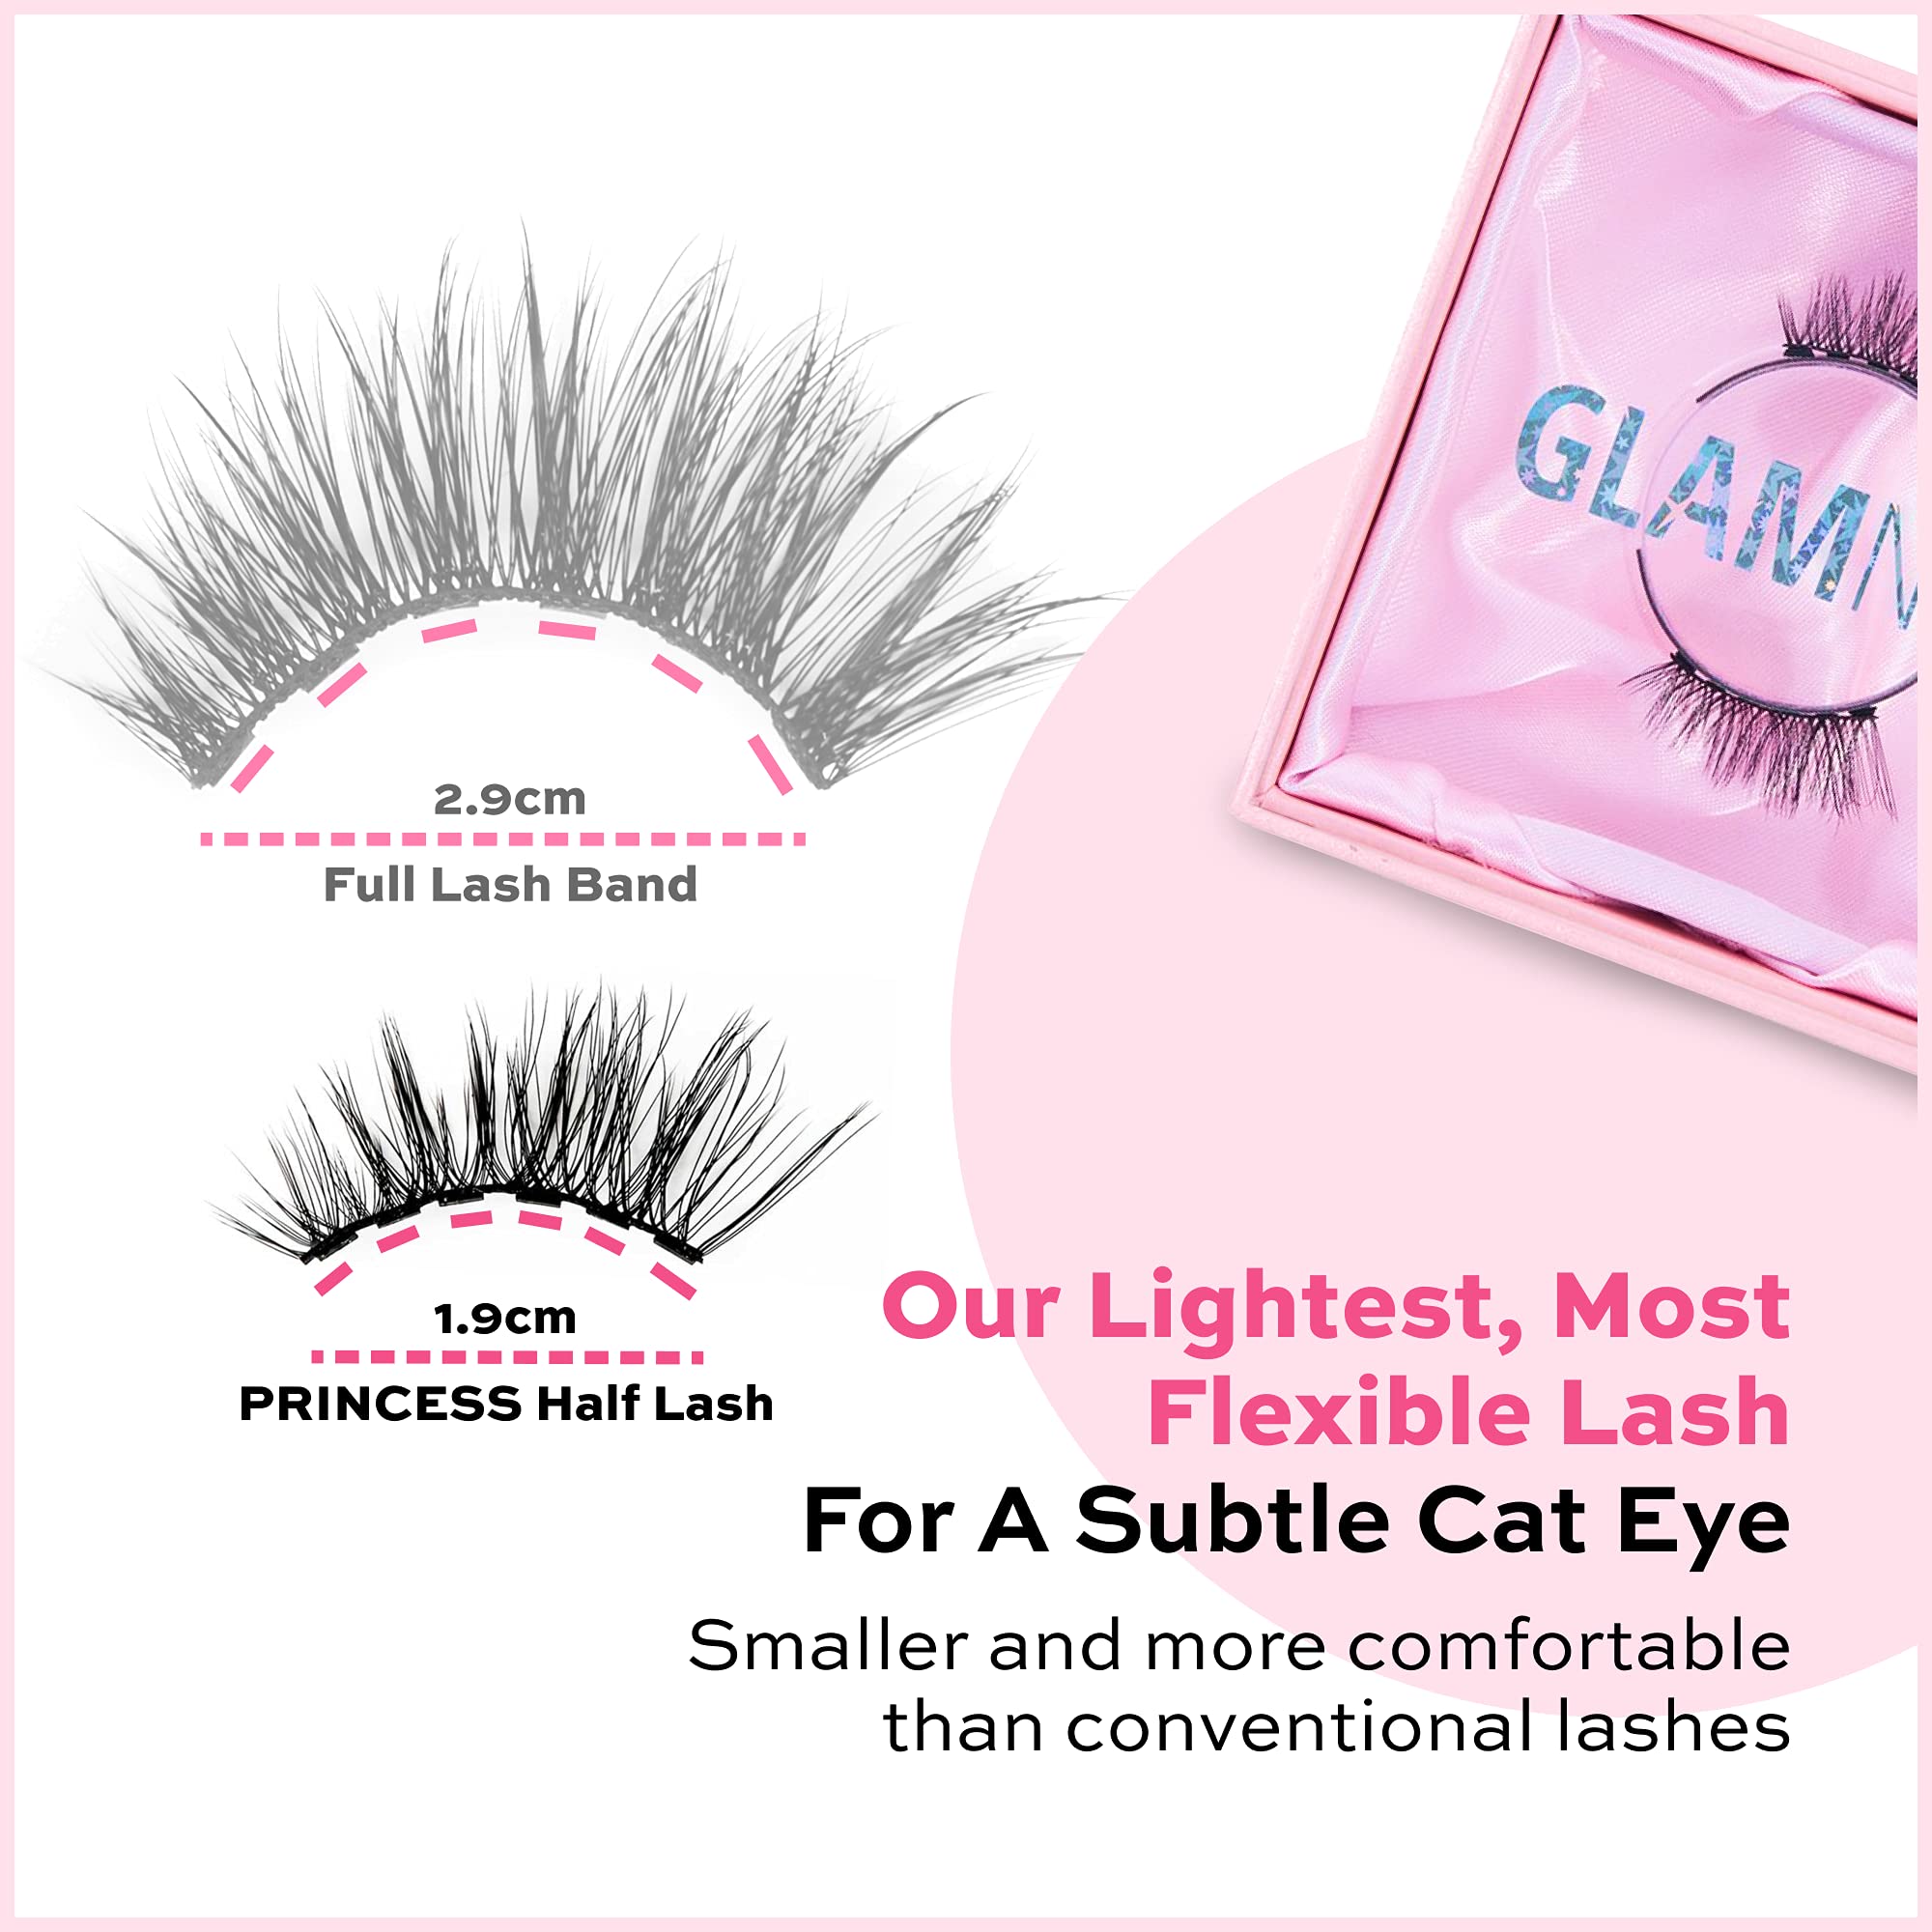 Glamnetic Magnetic Half Lashes Bundle - Princess & Queen | Natural Looking, Short Cat Eye Flared, 6 Magnet Band, Reusable up to 60 Wears